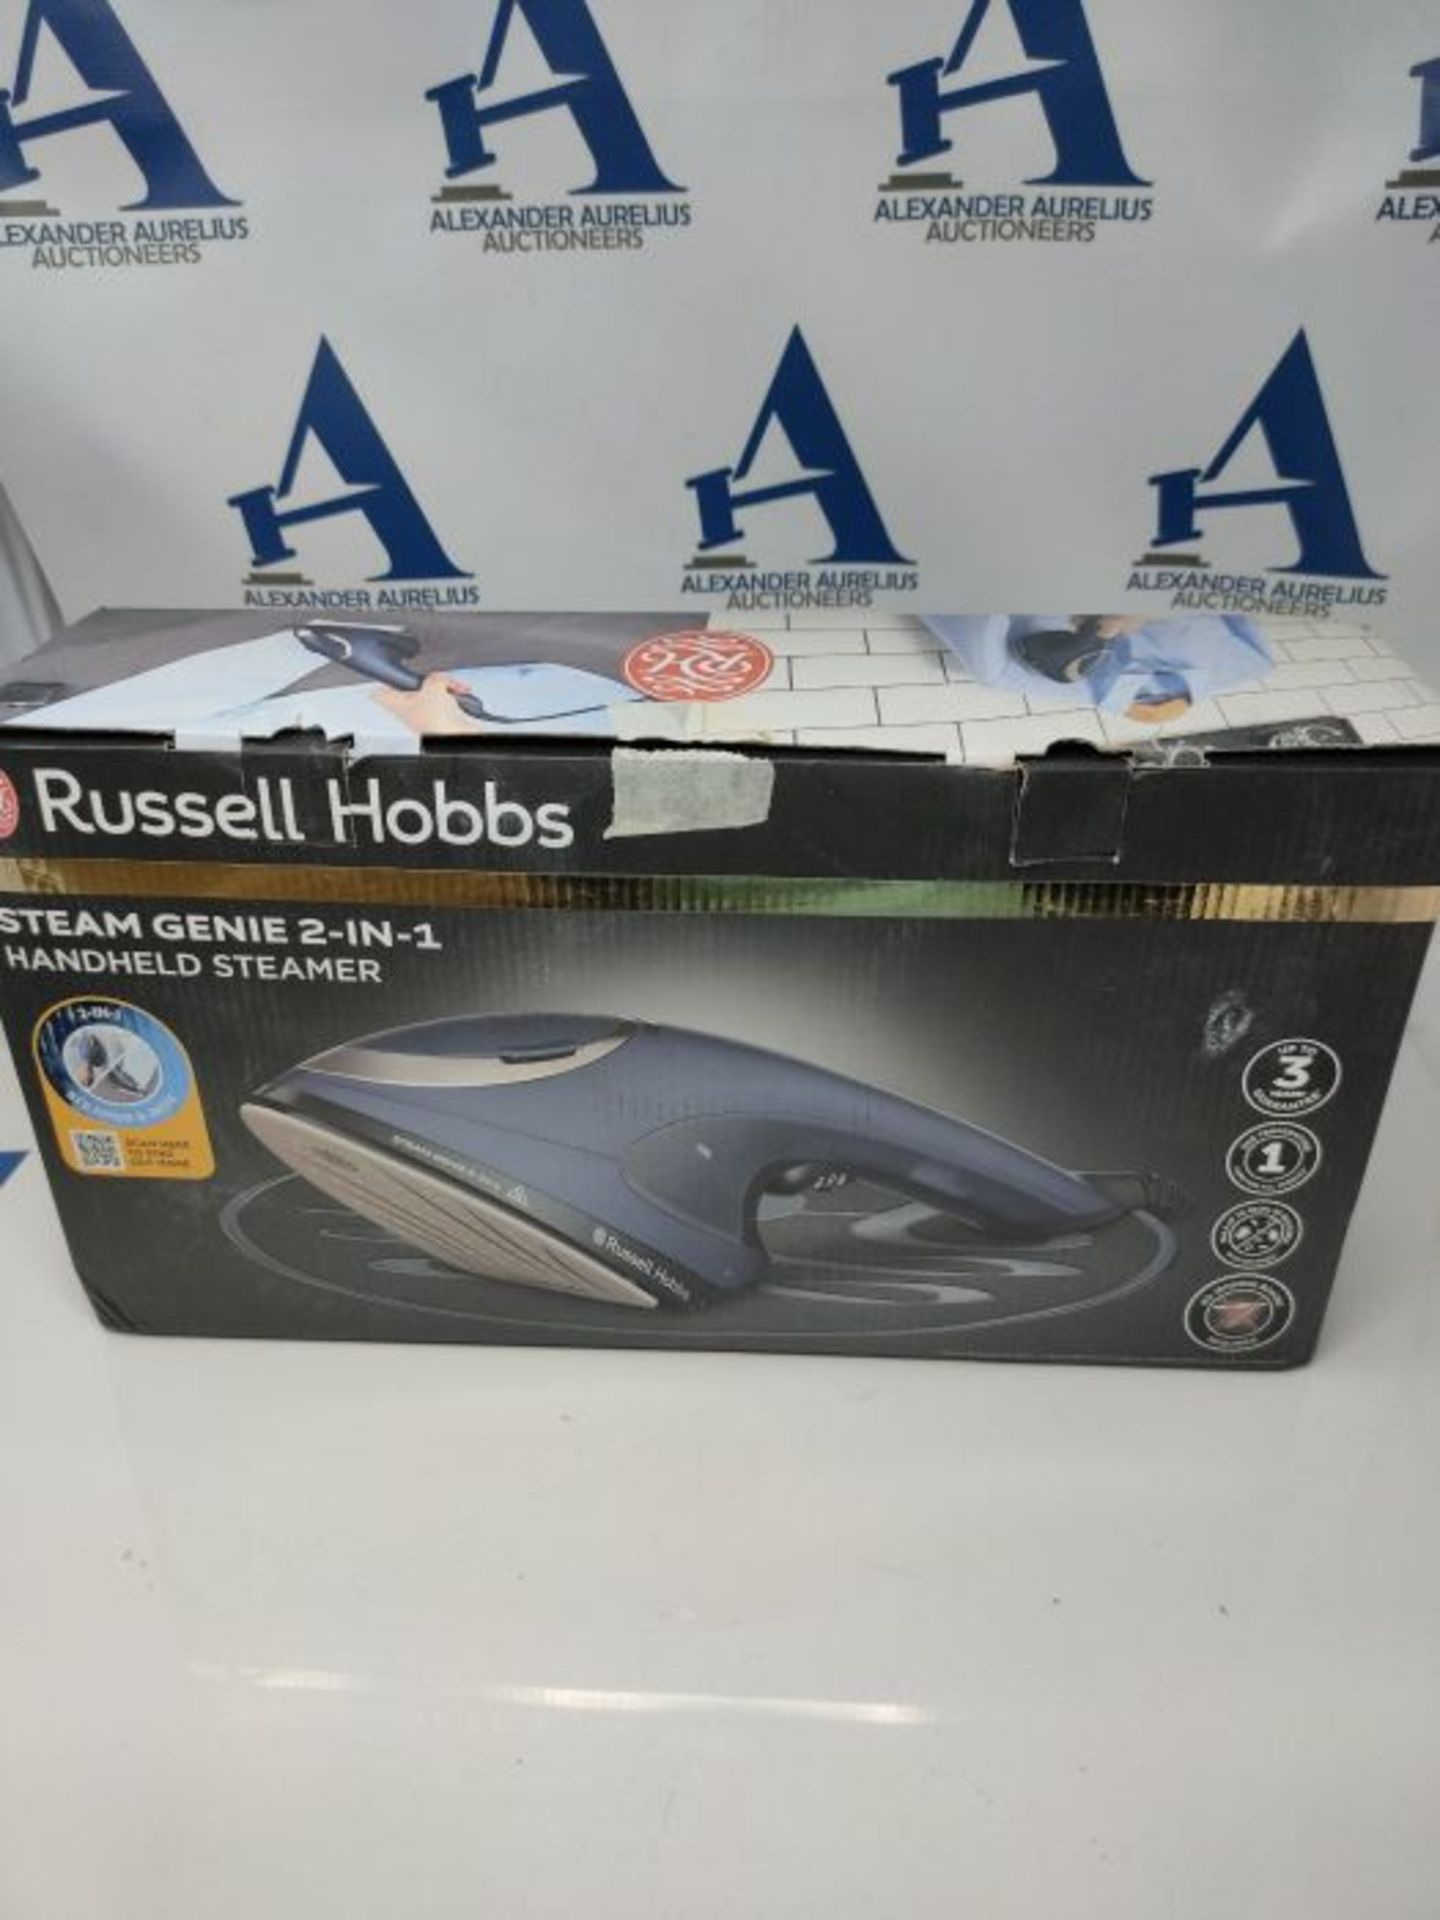 Russell Hobbs 28370 Steam Genie 2-In-1 Hand Held Clothes Steamer - Handheld Gament Ste - Image 2 of 3